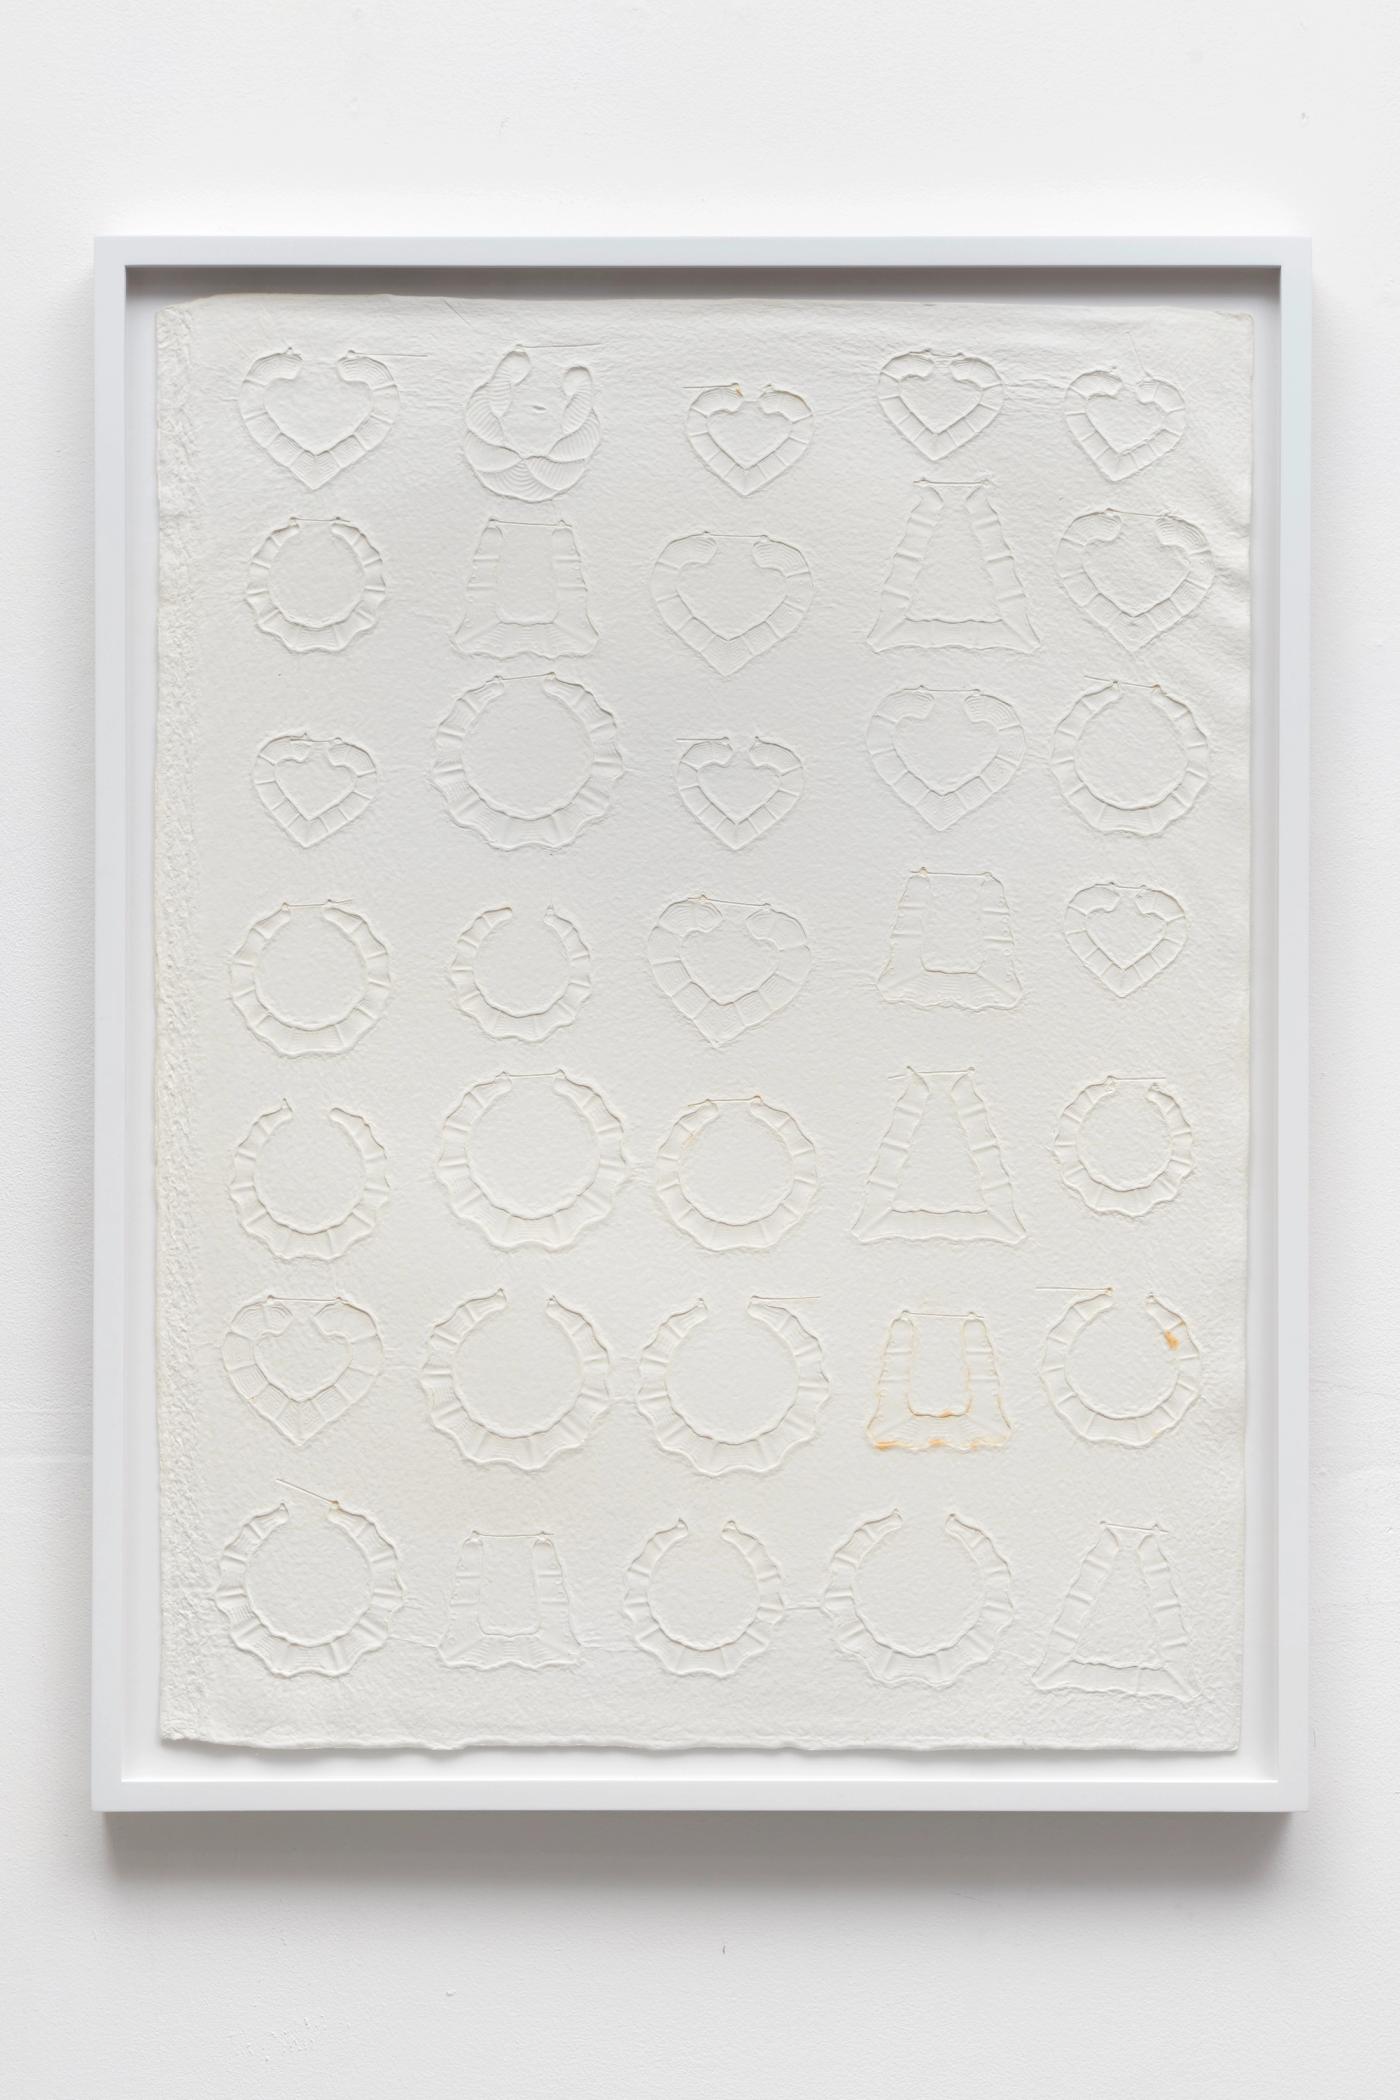 Image of Untitled, 2021: Embossed Cotton